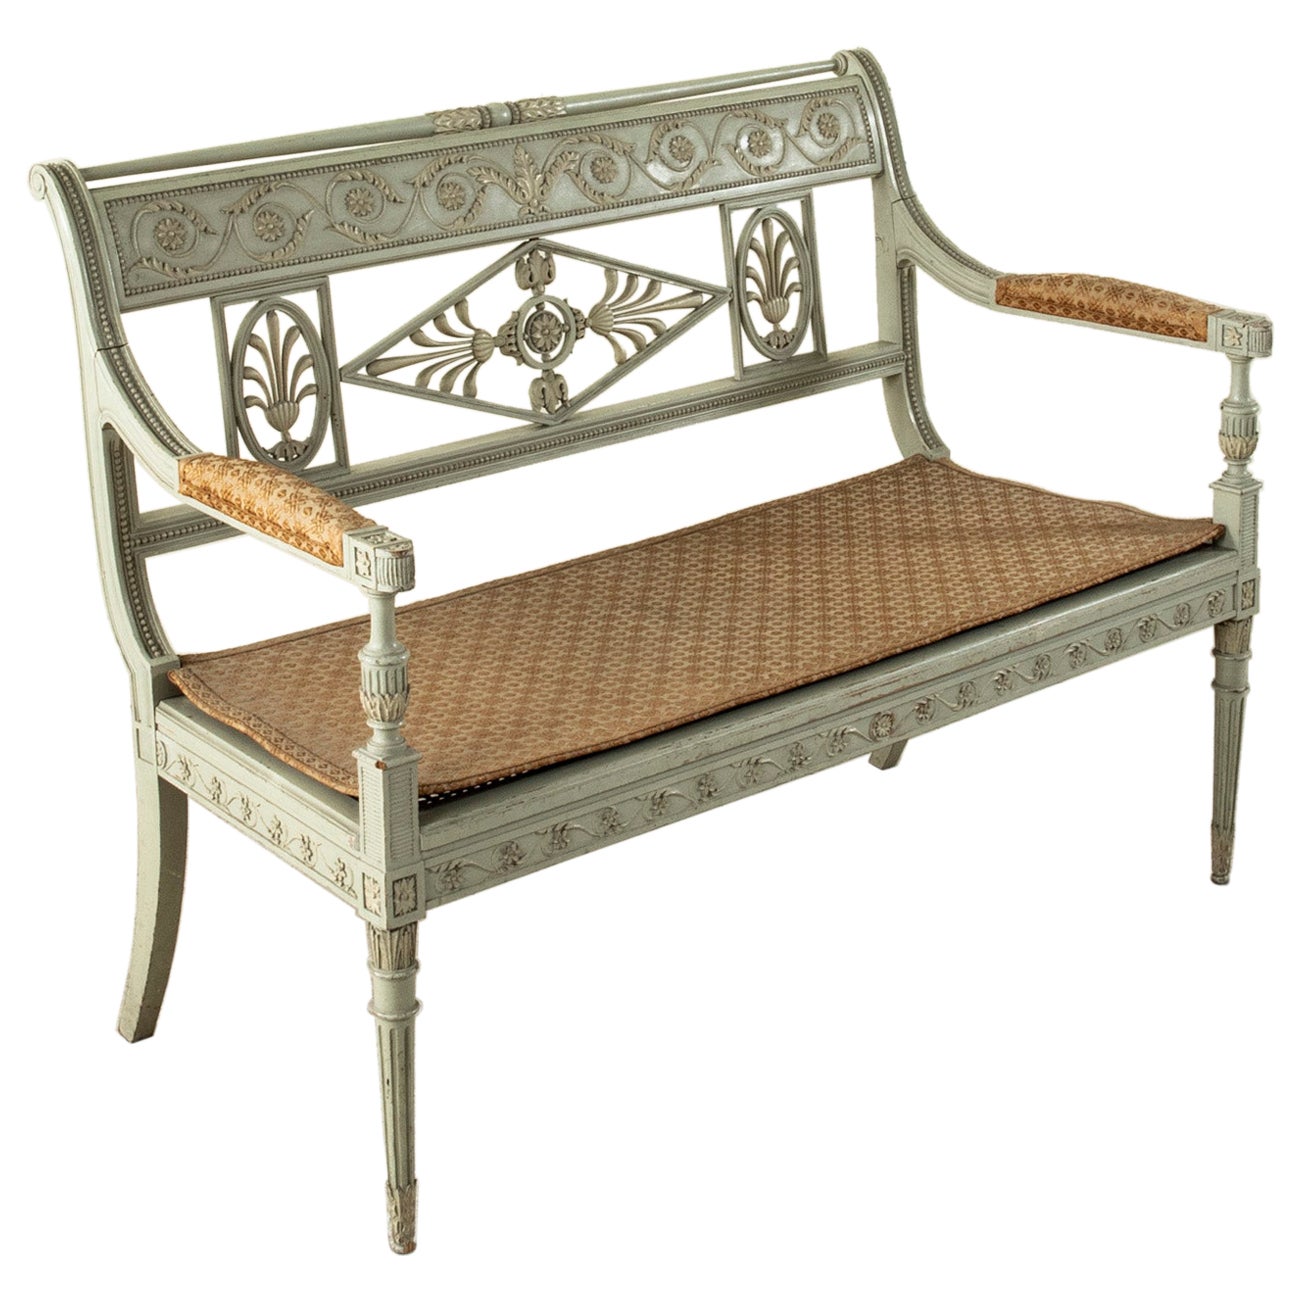 Early 20th Century French Directoire Style Painted Ash Banquette, Settee